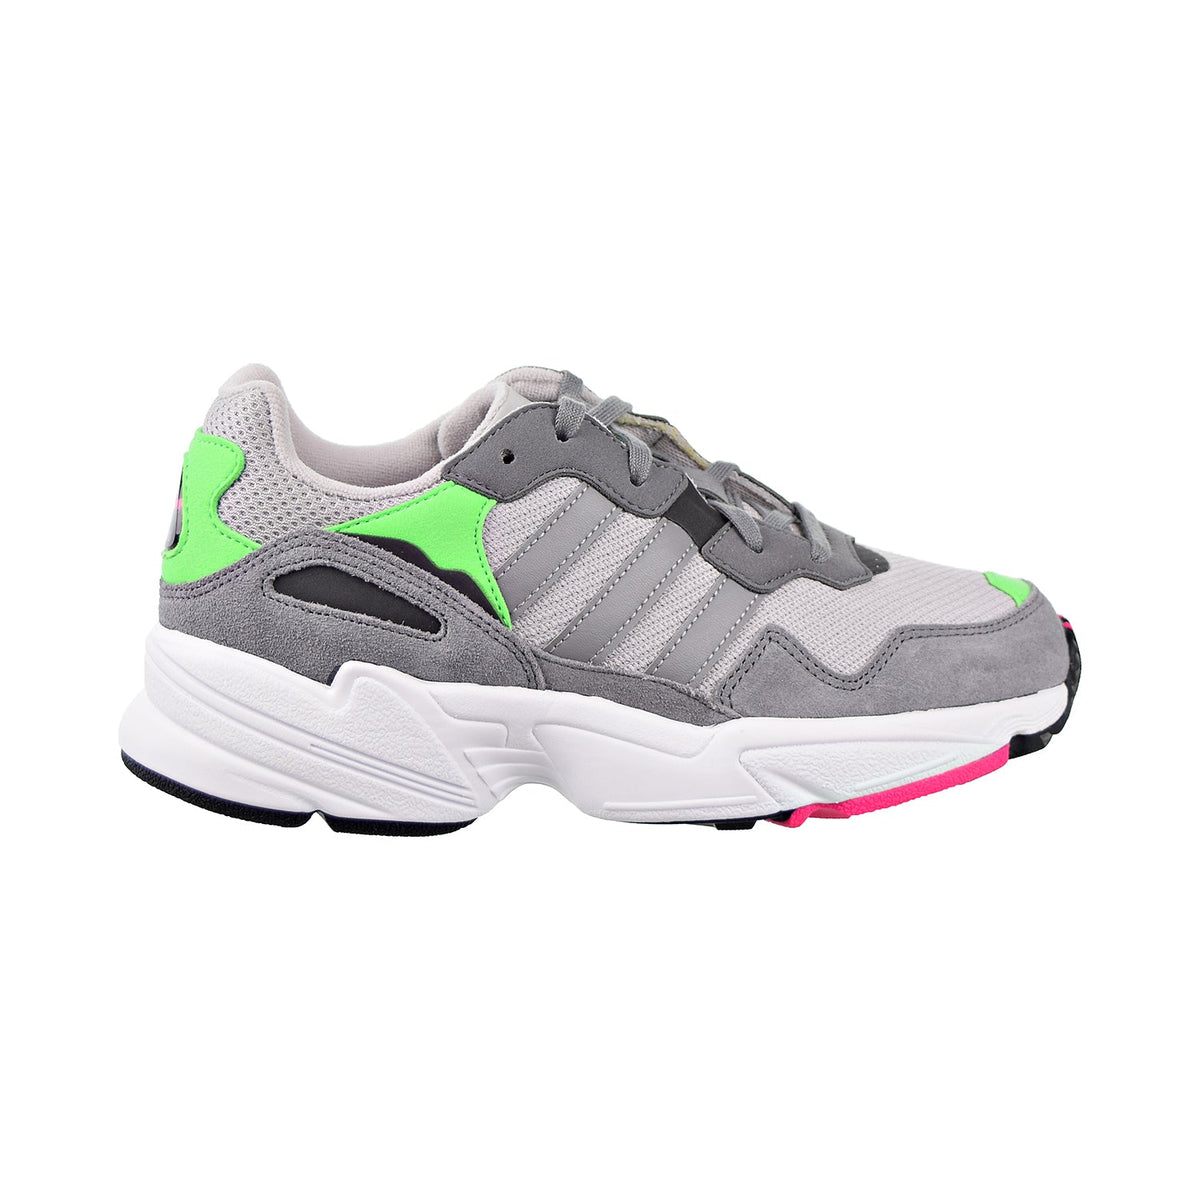 Mordrin synder højdepunkt Adidas Yung-96 Big Kids Shoes Grey Two/Grey Three/Shock Pink – Sports Plaza  NY